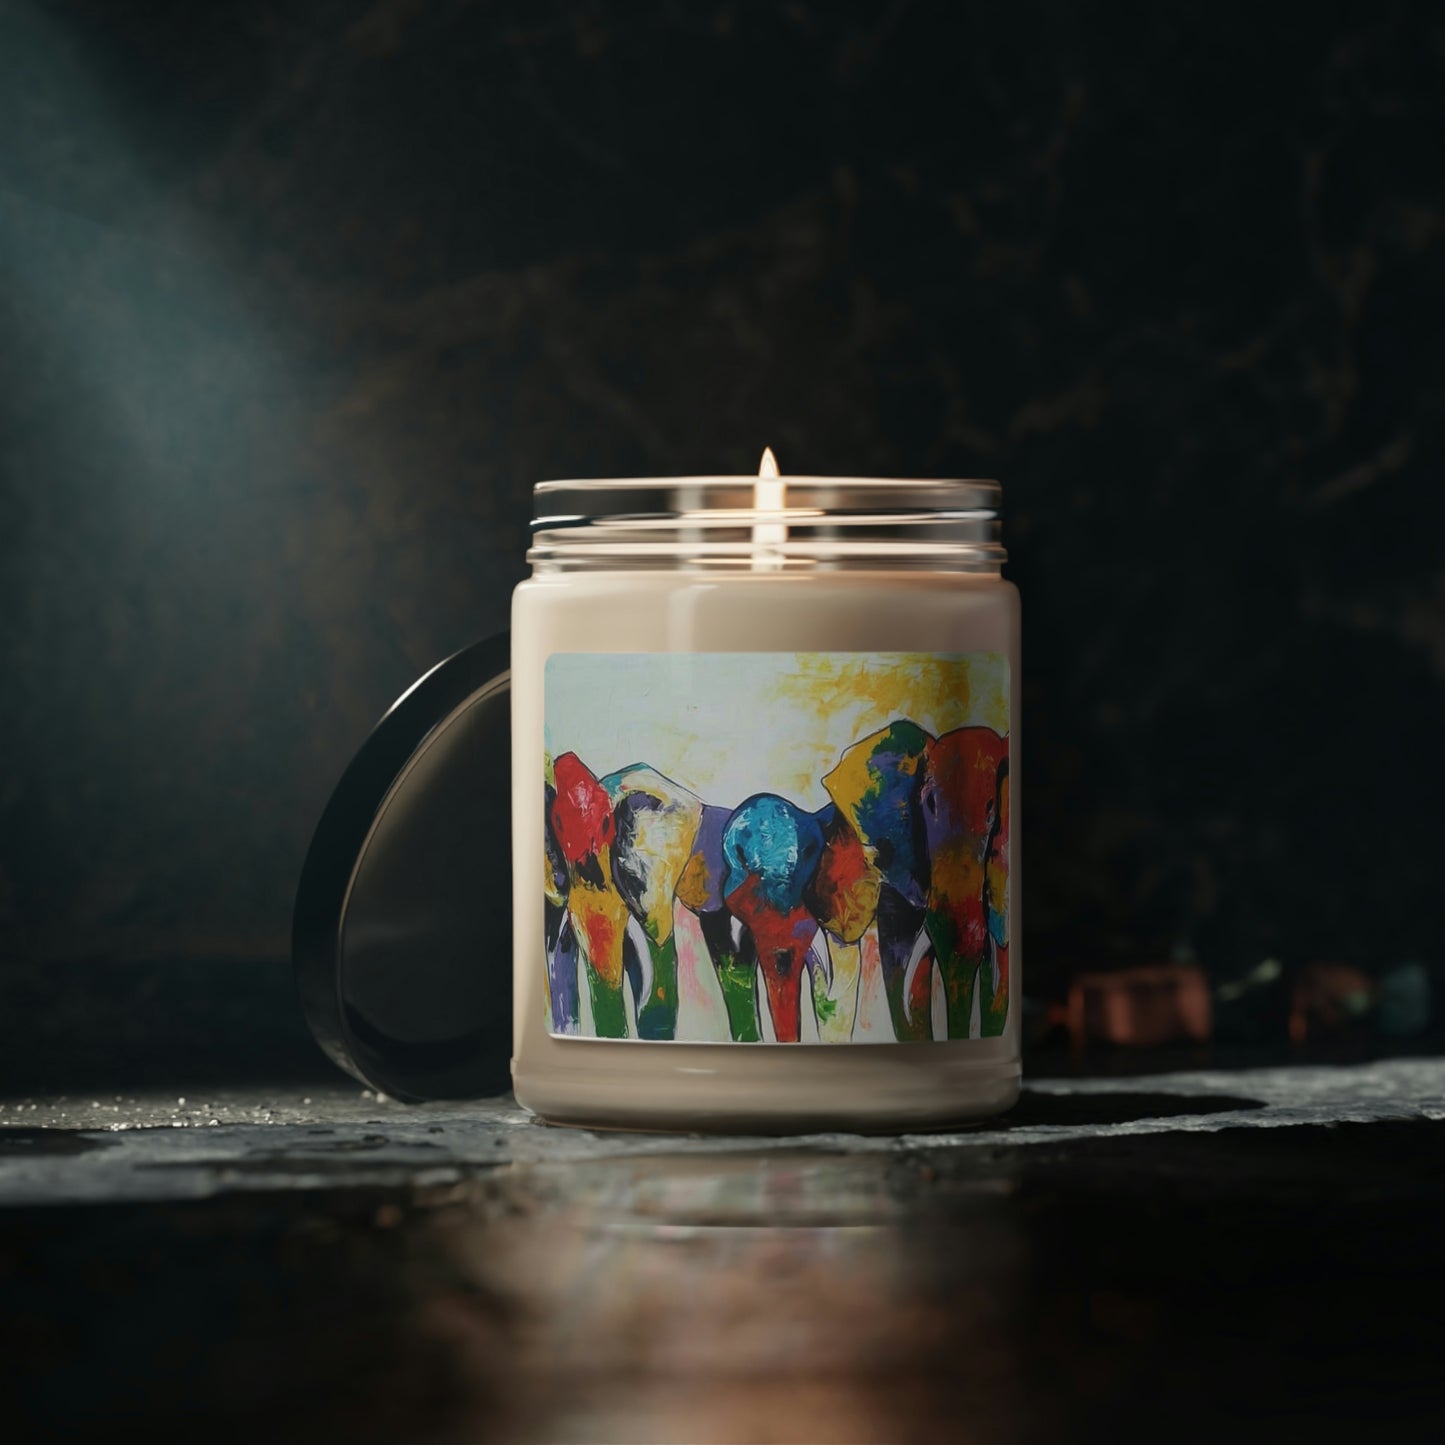 Colorful African Elephants - Scented Soy Candle, 9oz